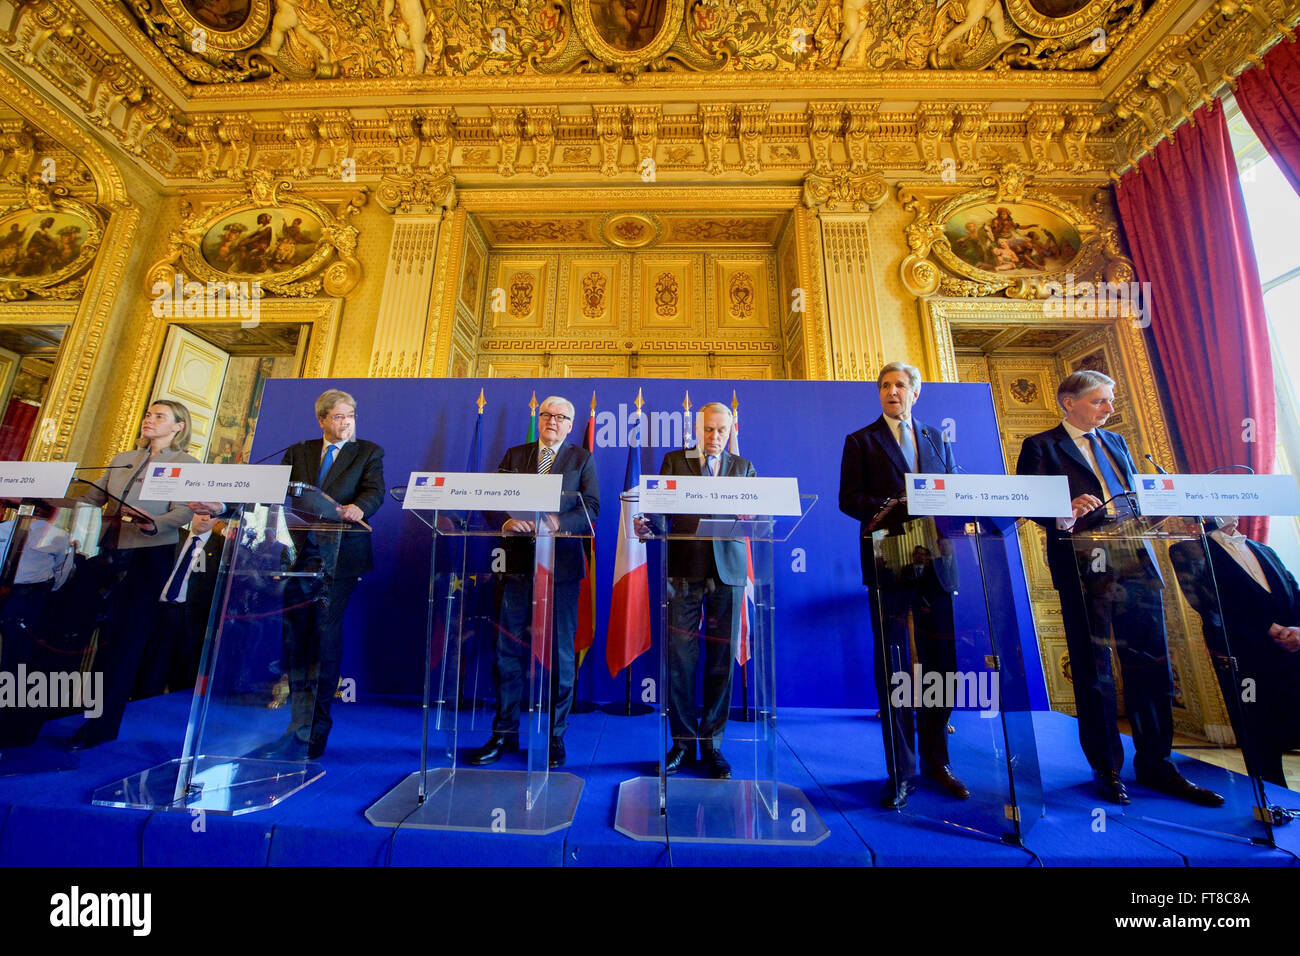 U.S. Secretary of State John Kerry stands with his counterparts on March 13, 2015, at the Quai d'Orsay in Paris, France, as he addresses reporters after they held an E4+1 meeting - including representatives of France, Germany, Italy, the United Kingdom, and European Union - focused on Syria, Libya, Yemen, Ukraine, and other foreign policy matters. [State Department Photo/Public Domain] Stock Photo